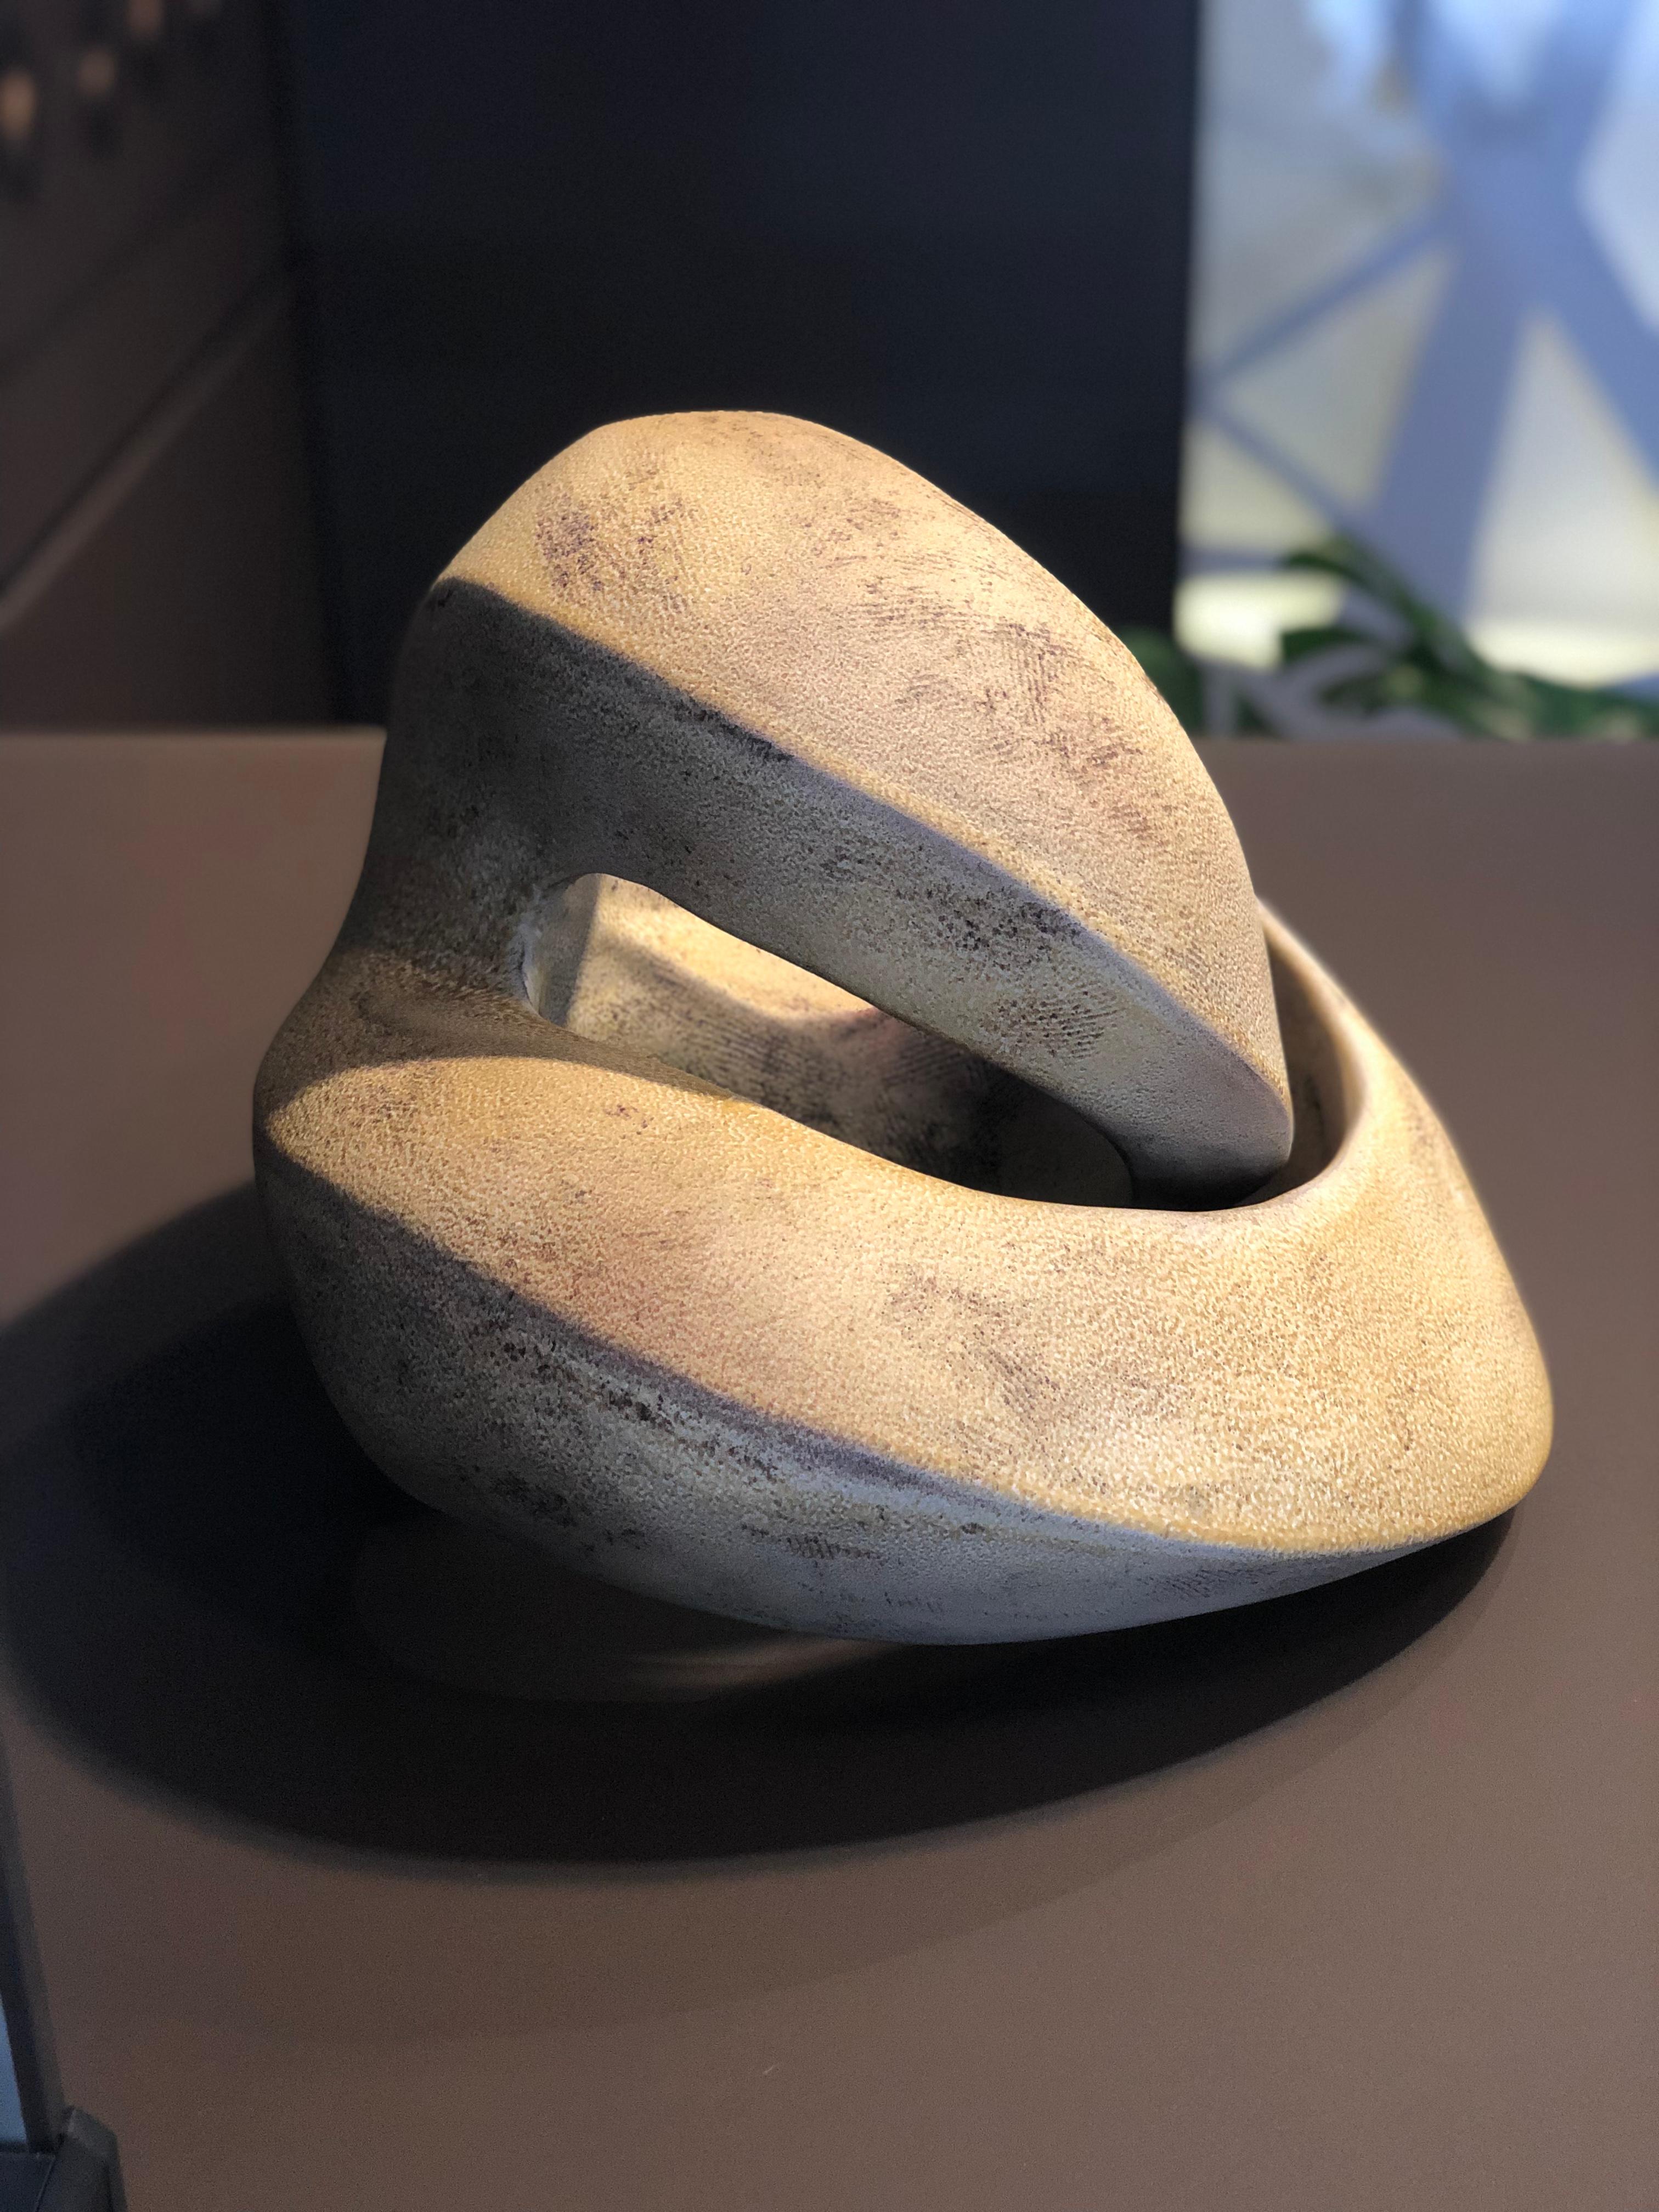 Amber Coil, Hand Built Ceramic Sculptural Organic Form in Subtle Earth Tones In New Condition For Sale In Chicago, IL